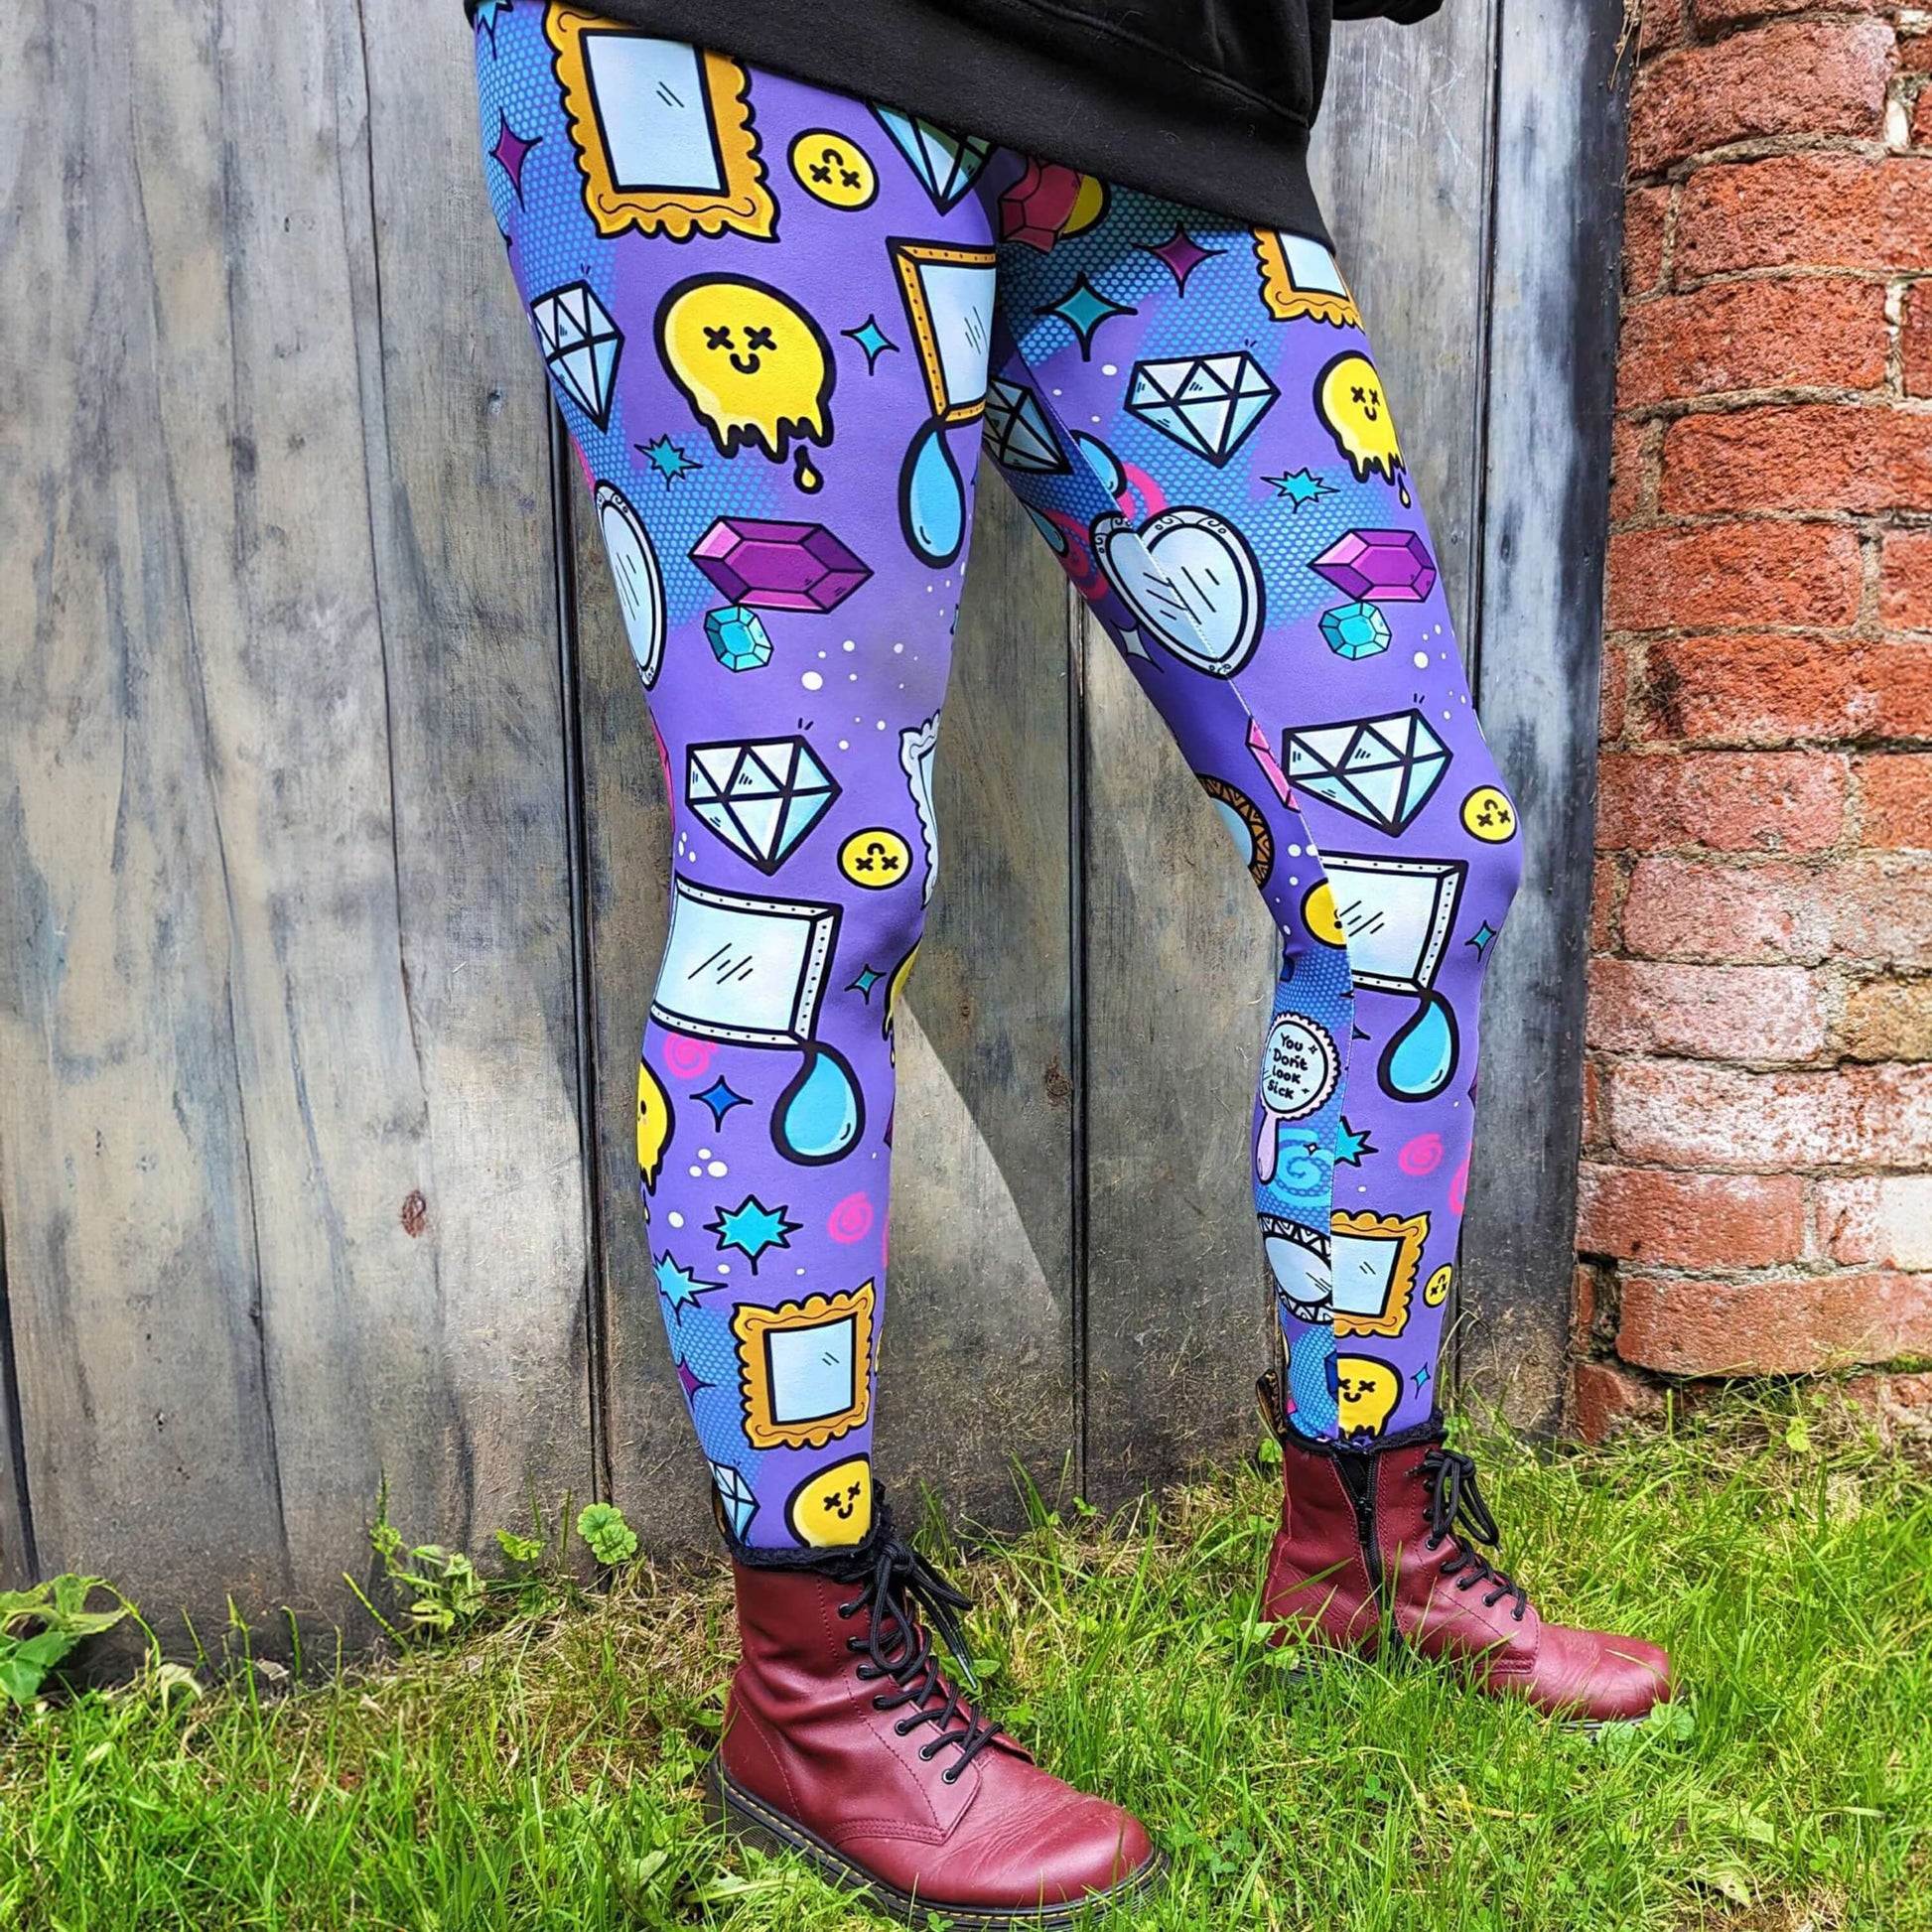 The You Don't Look Sick Leggings modelled by the owner of Innabox Nikky with red boots and the innabox invisible illness club sweater. She is stood in front of a wooden door next to a brick wall. The purple base leggings features melting yellow smiley faces, mirrors, gemstones, teardrops, sparkles, swirls and dots with a centre hand held mirror reading 'you don't look sick'. The hand drawn design is raising awareness for invisible illnesses.